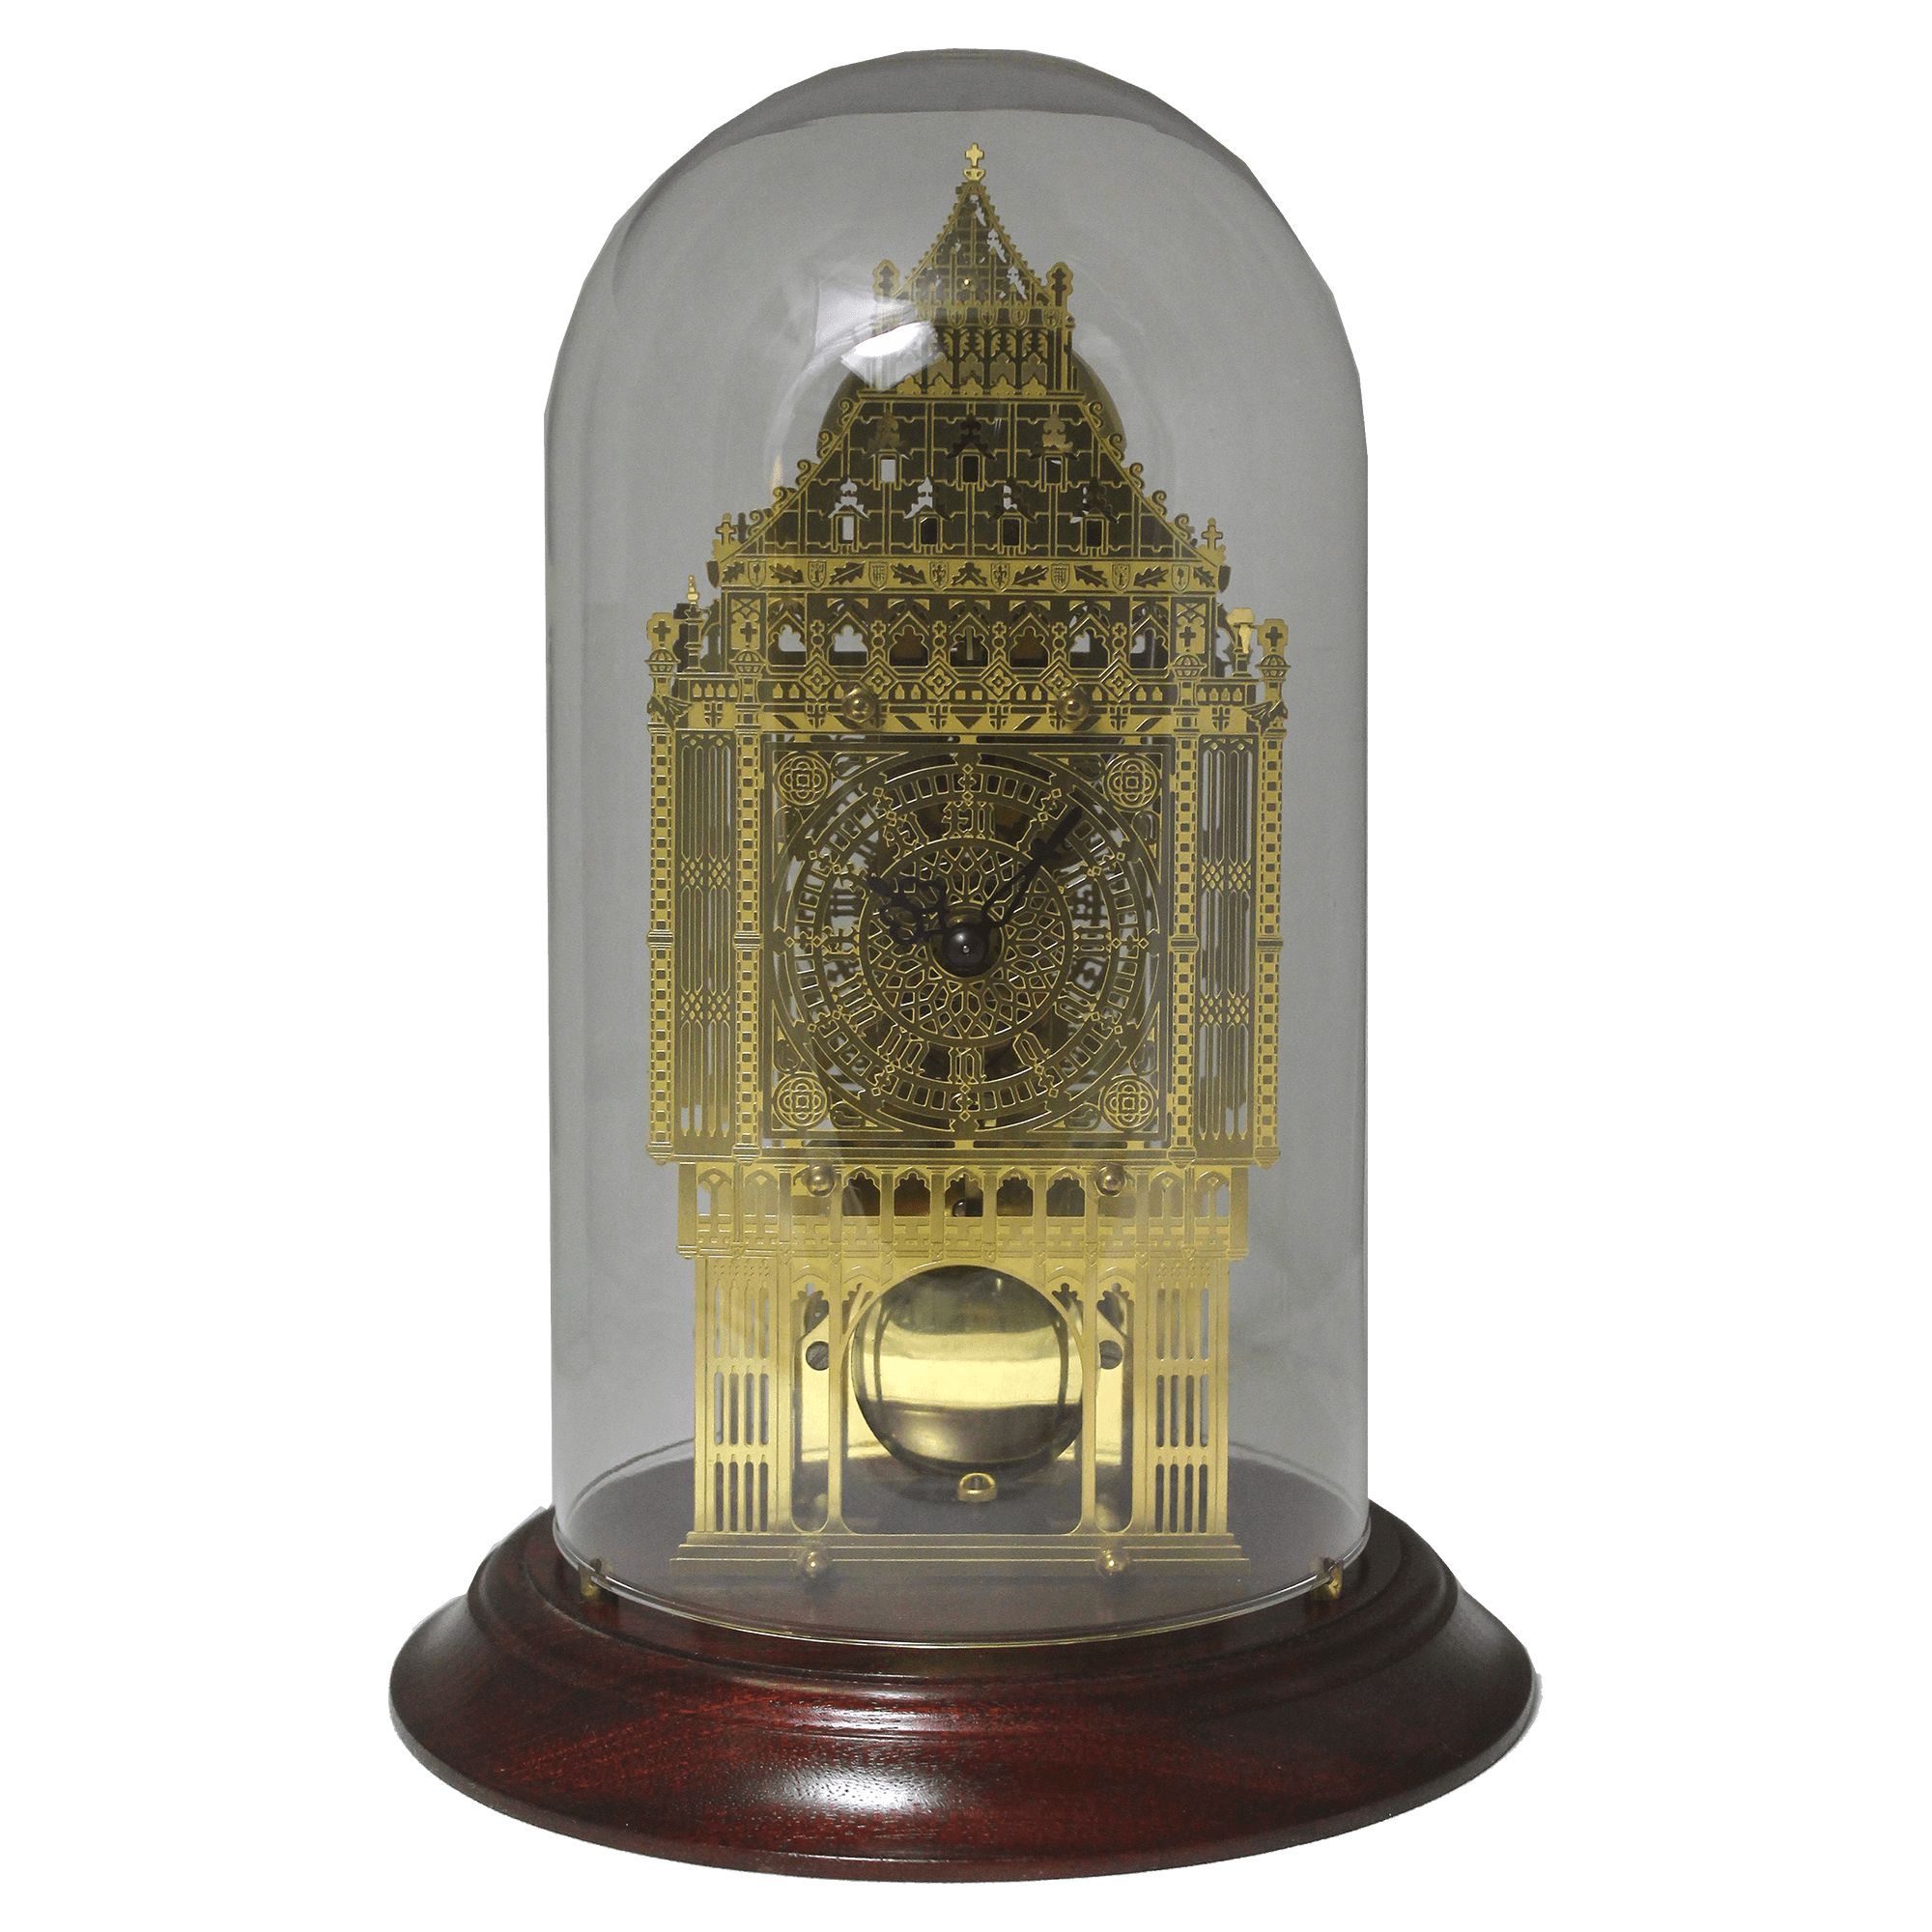 3D Gold Plated Brass Keepsake Ornament with Display Case